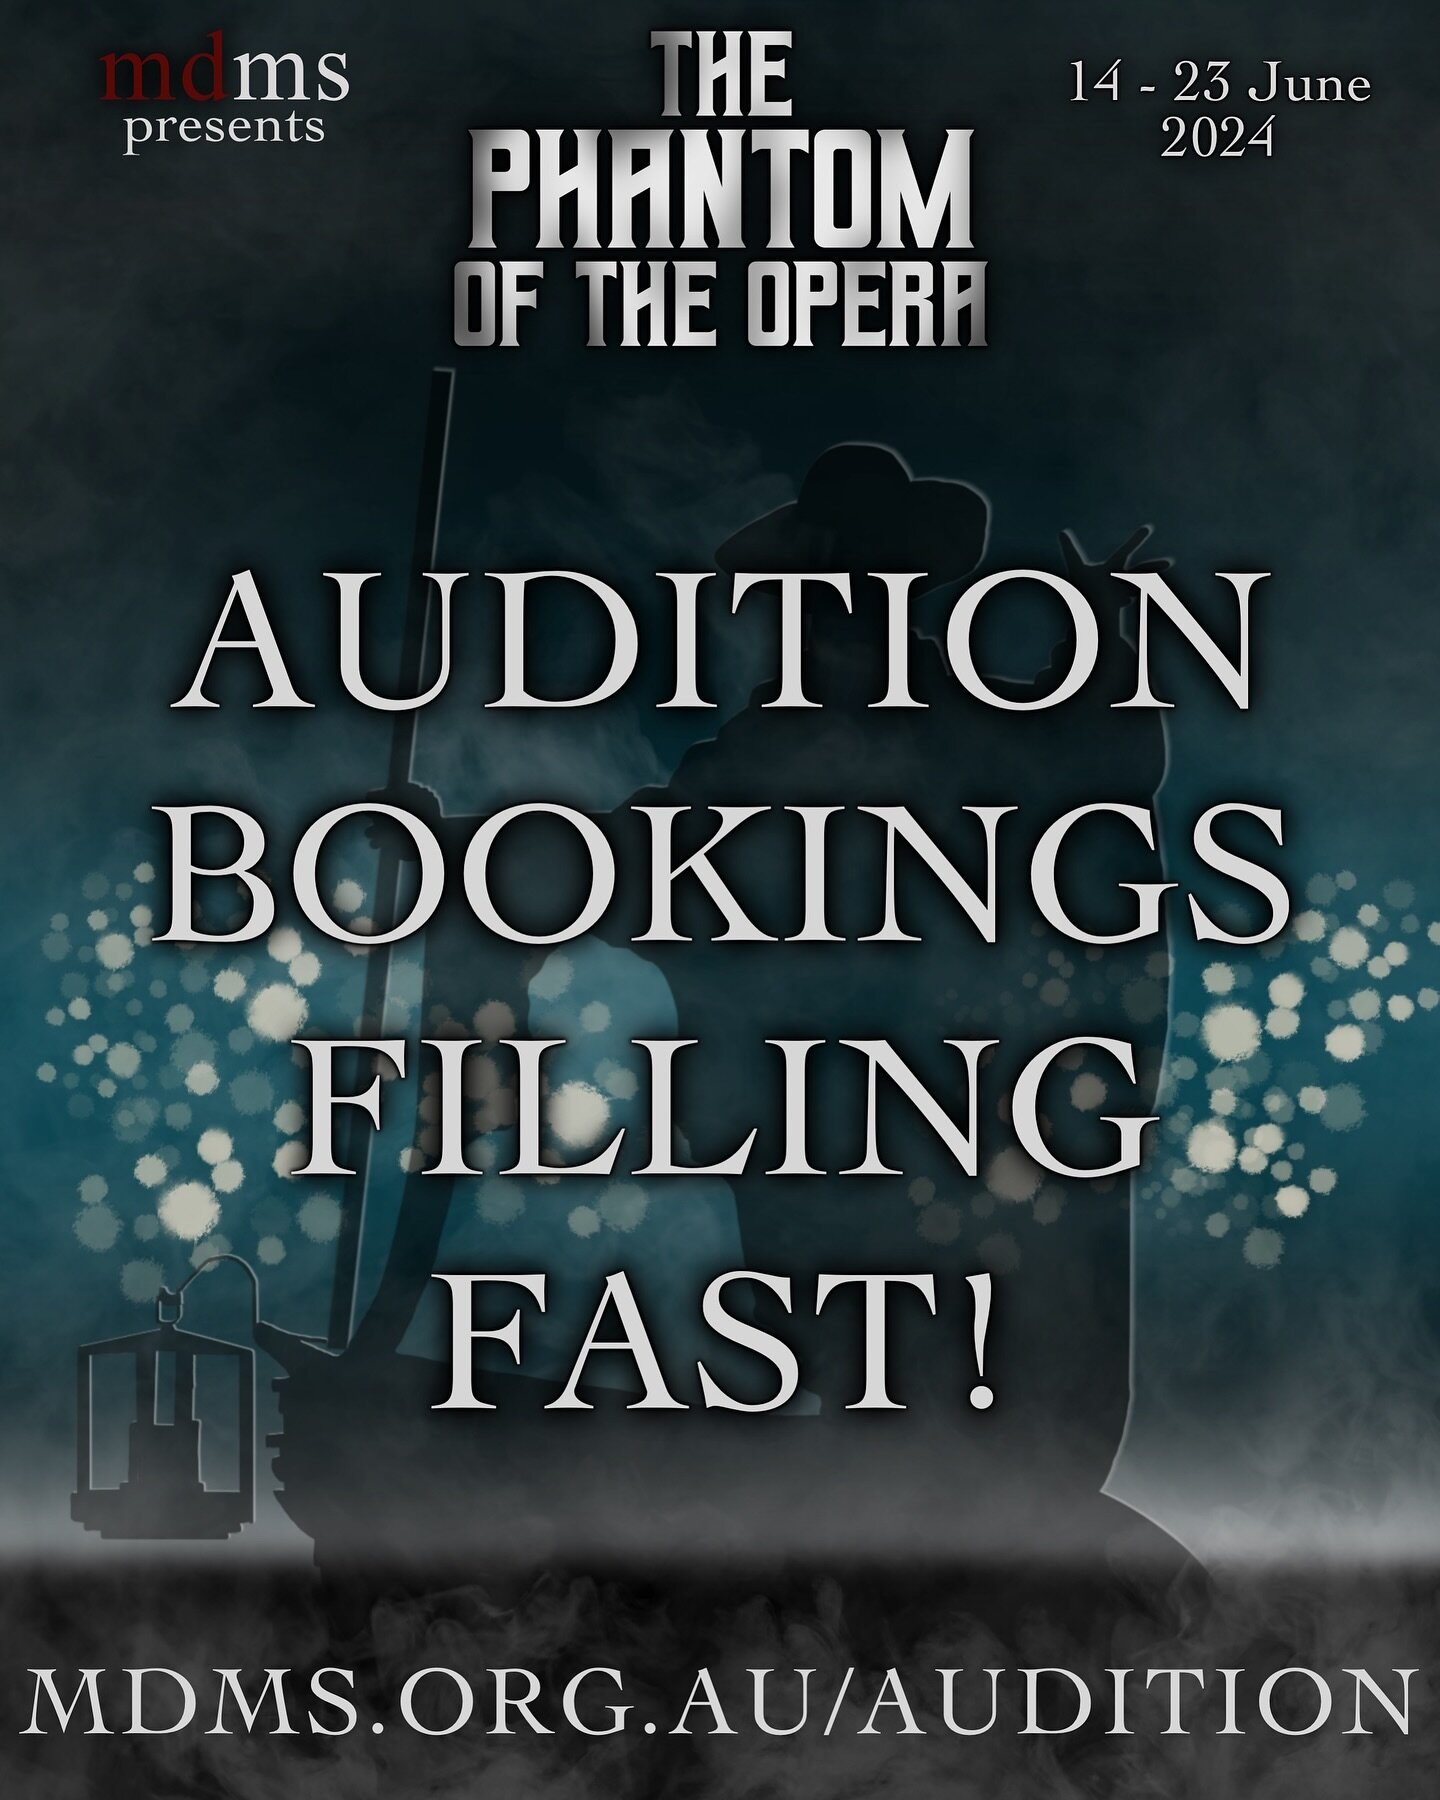 Don&rsquo;t miss out! Book your audition now for MDMS&rsquo;s 𝙏𝙃𝙀 𝙋𝙃𝘼𝙉𝙏𝙊𝙈 𝙊𝙁 𝙏𝙃𝙀 𝙊𝙋𝙀𝙍𝘼 🥀
Visit 𝙢𝙙𝙢𝙨.𝙤𝙧𝙜.𝙖𝙪/𝙖𝙪𝙙𝙞𝙩𝙞𝙤𝙣 to secure one of the last remaining spots!
AUDITION DATES: 14 - 17 JANUARY
#mdmsphantom